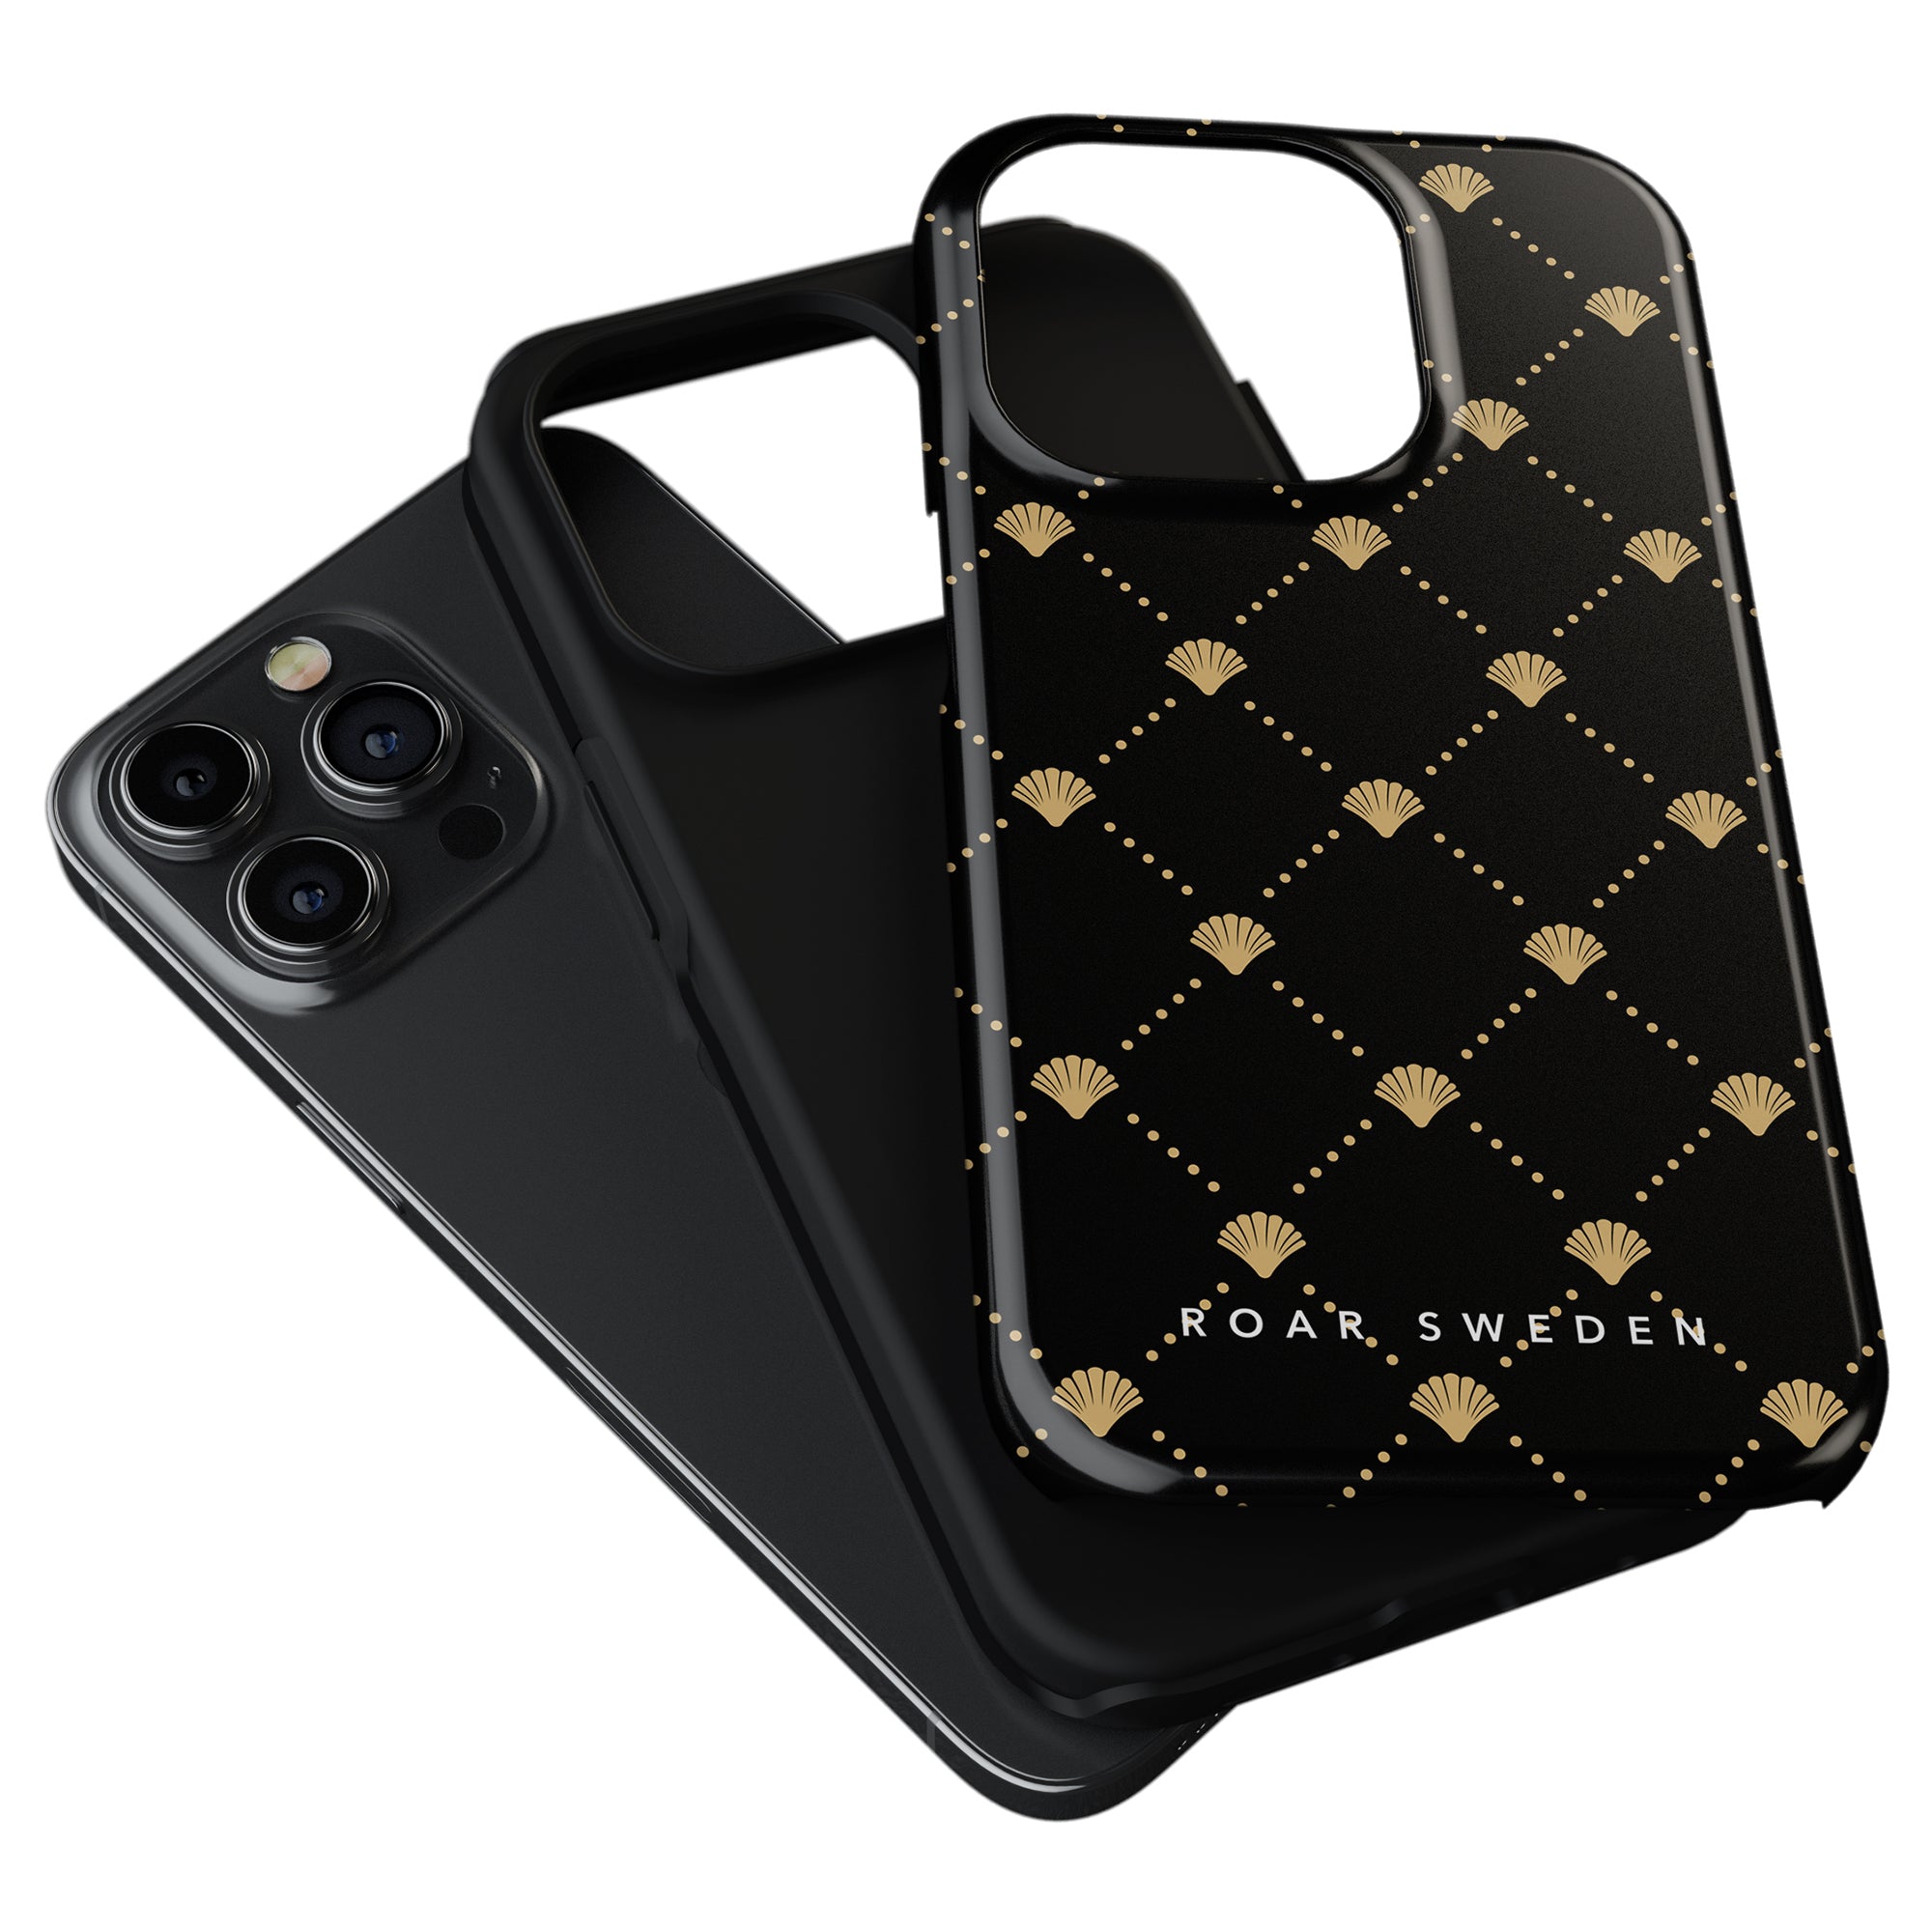 Black iPhone with a detached Luxe Shells Black - Tough Case featuring a black and gold patterned design and the text "ROAR, SWEDEN" from the Ocean Collection.